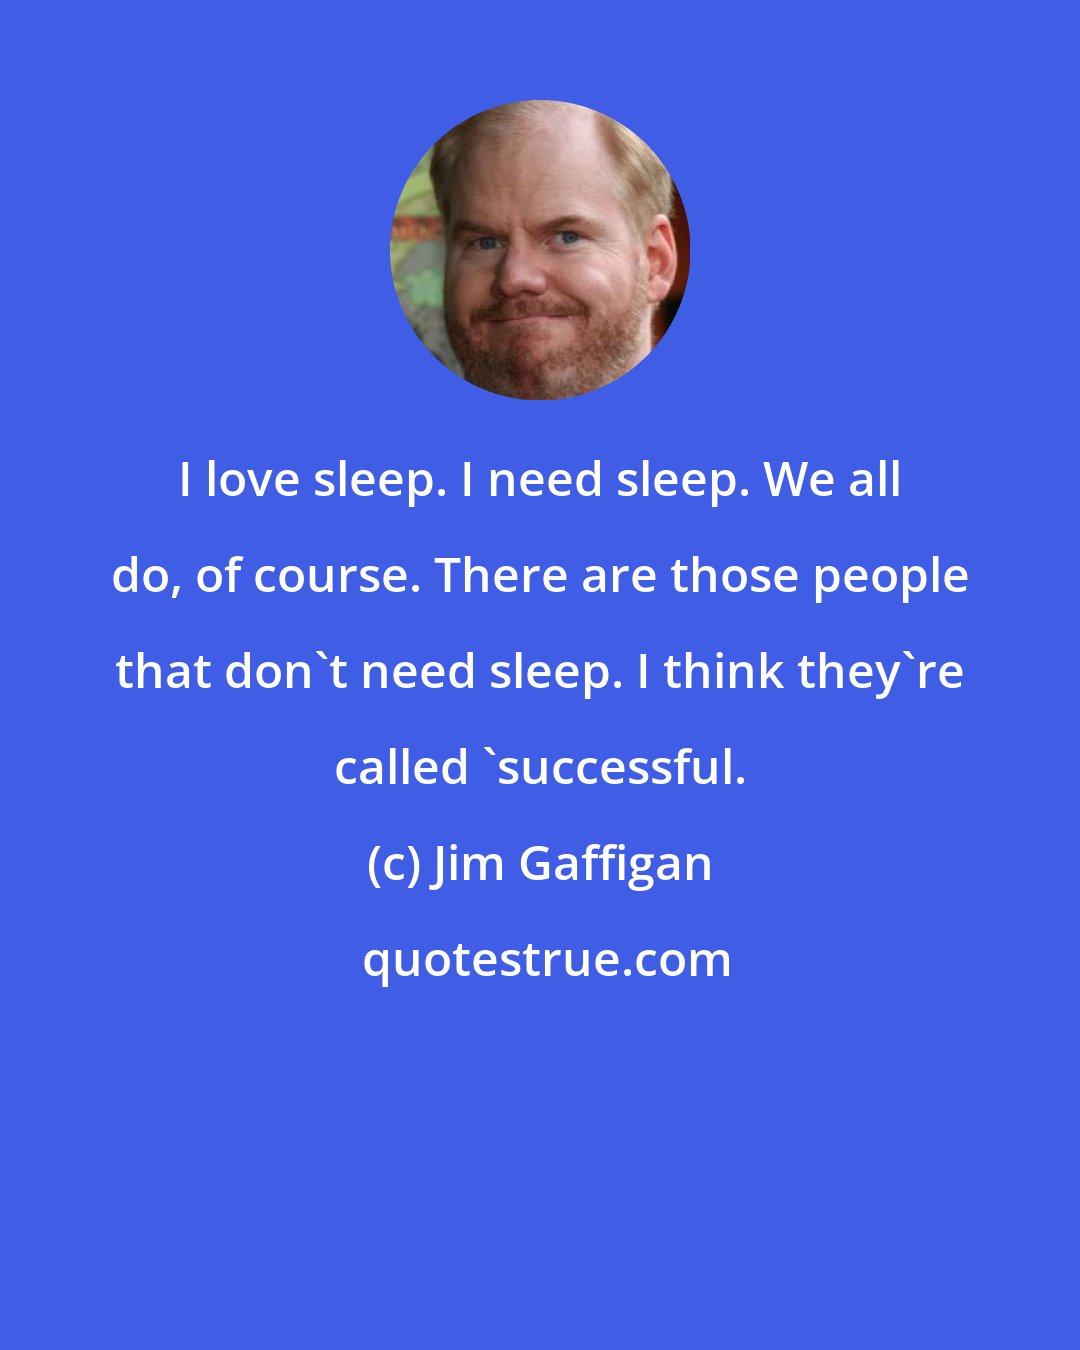 Jim Gaffigan: I love sleep. I need sleep. We all do, of course. There are those people that don't need sleep. I think they're called 'successful.